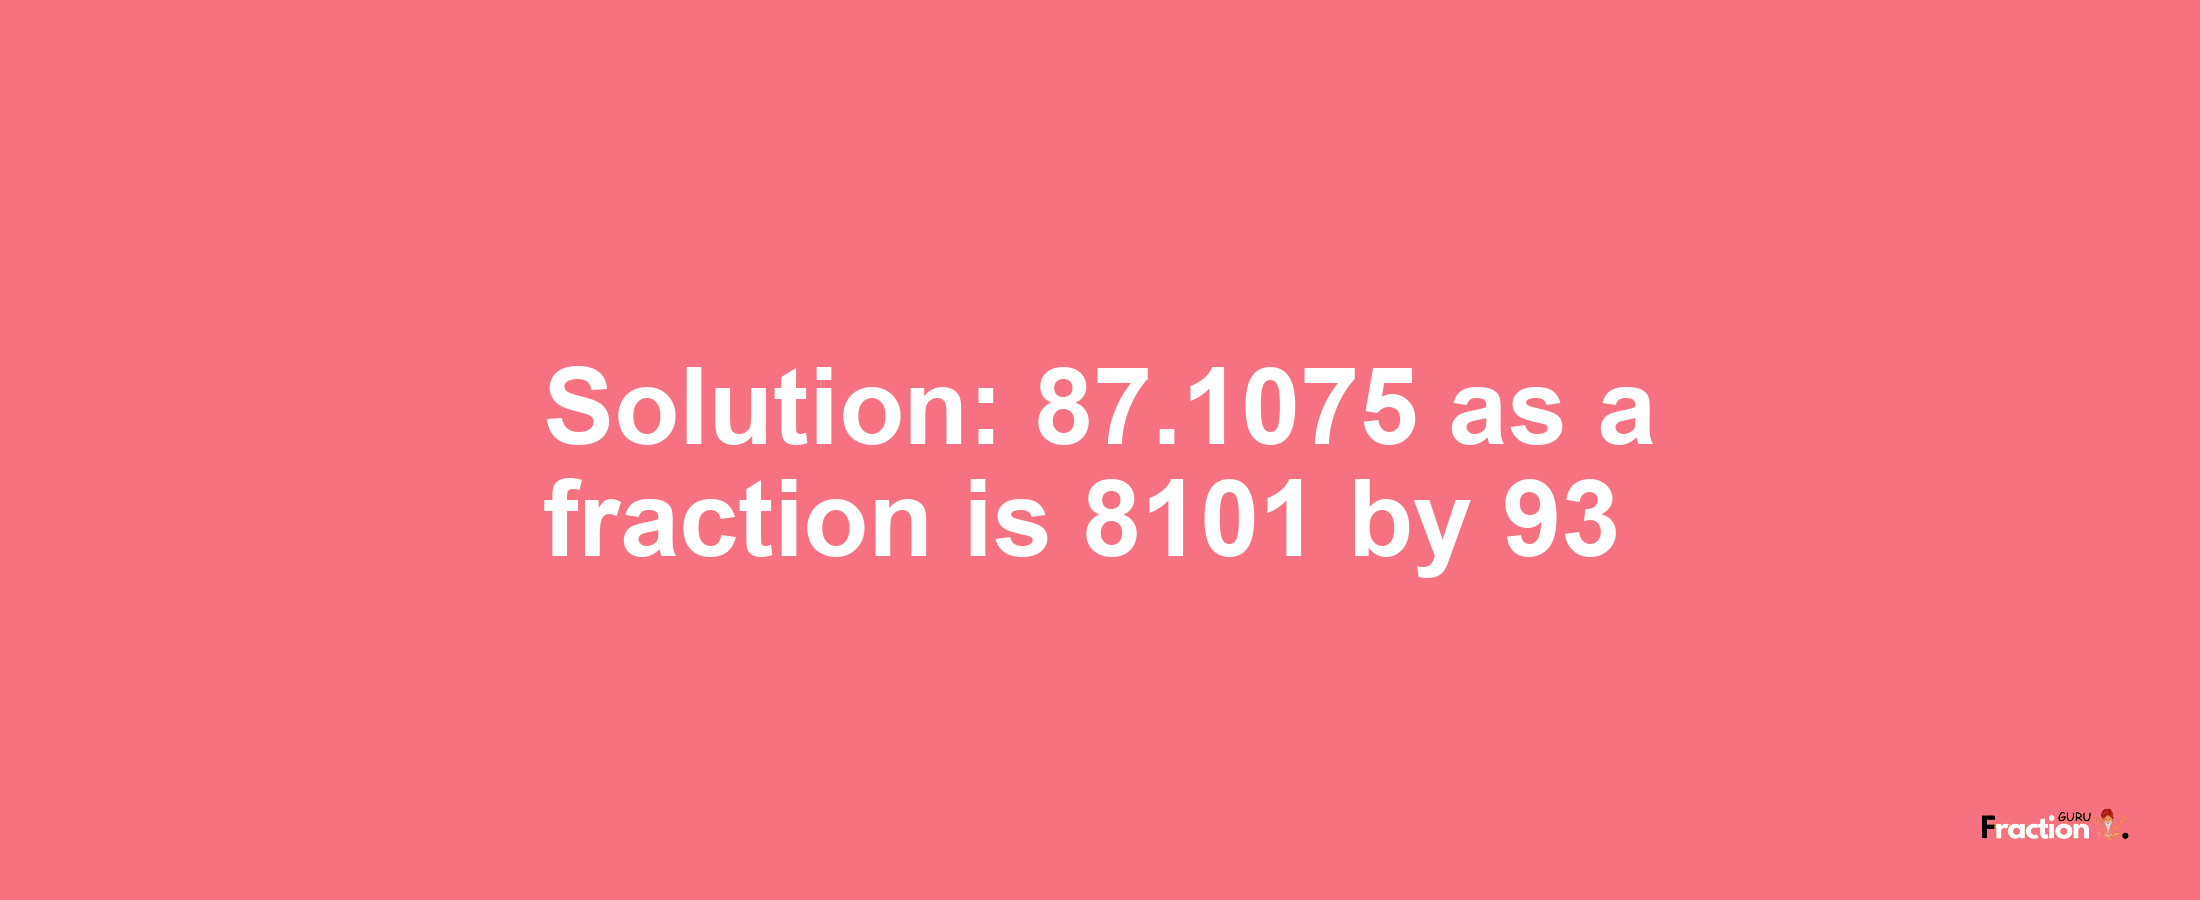 Solution:87.1075 as a fraction is 8101/93